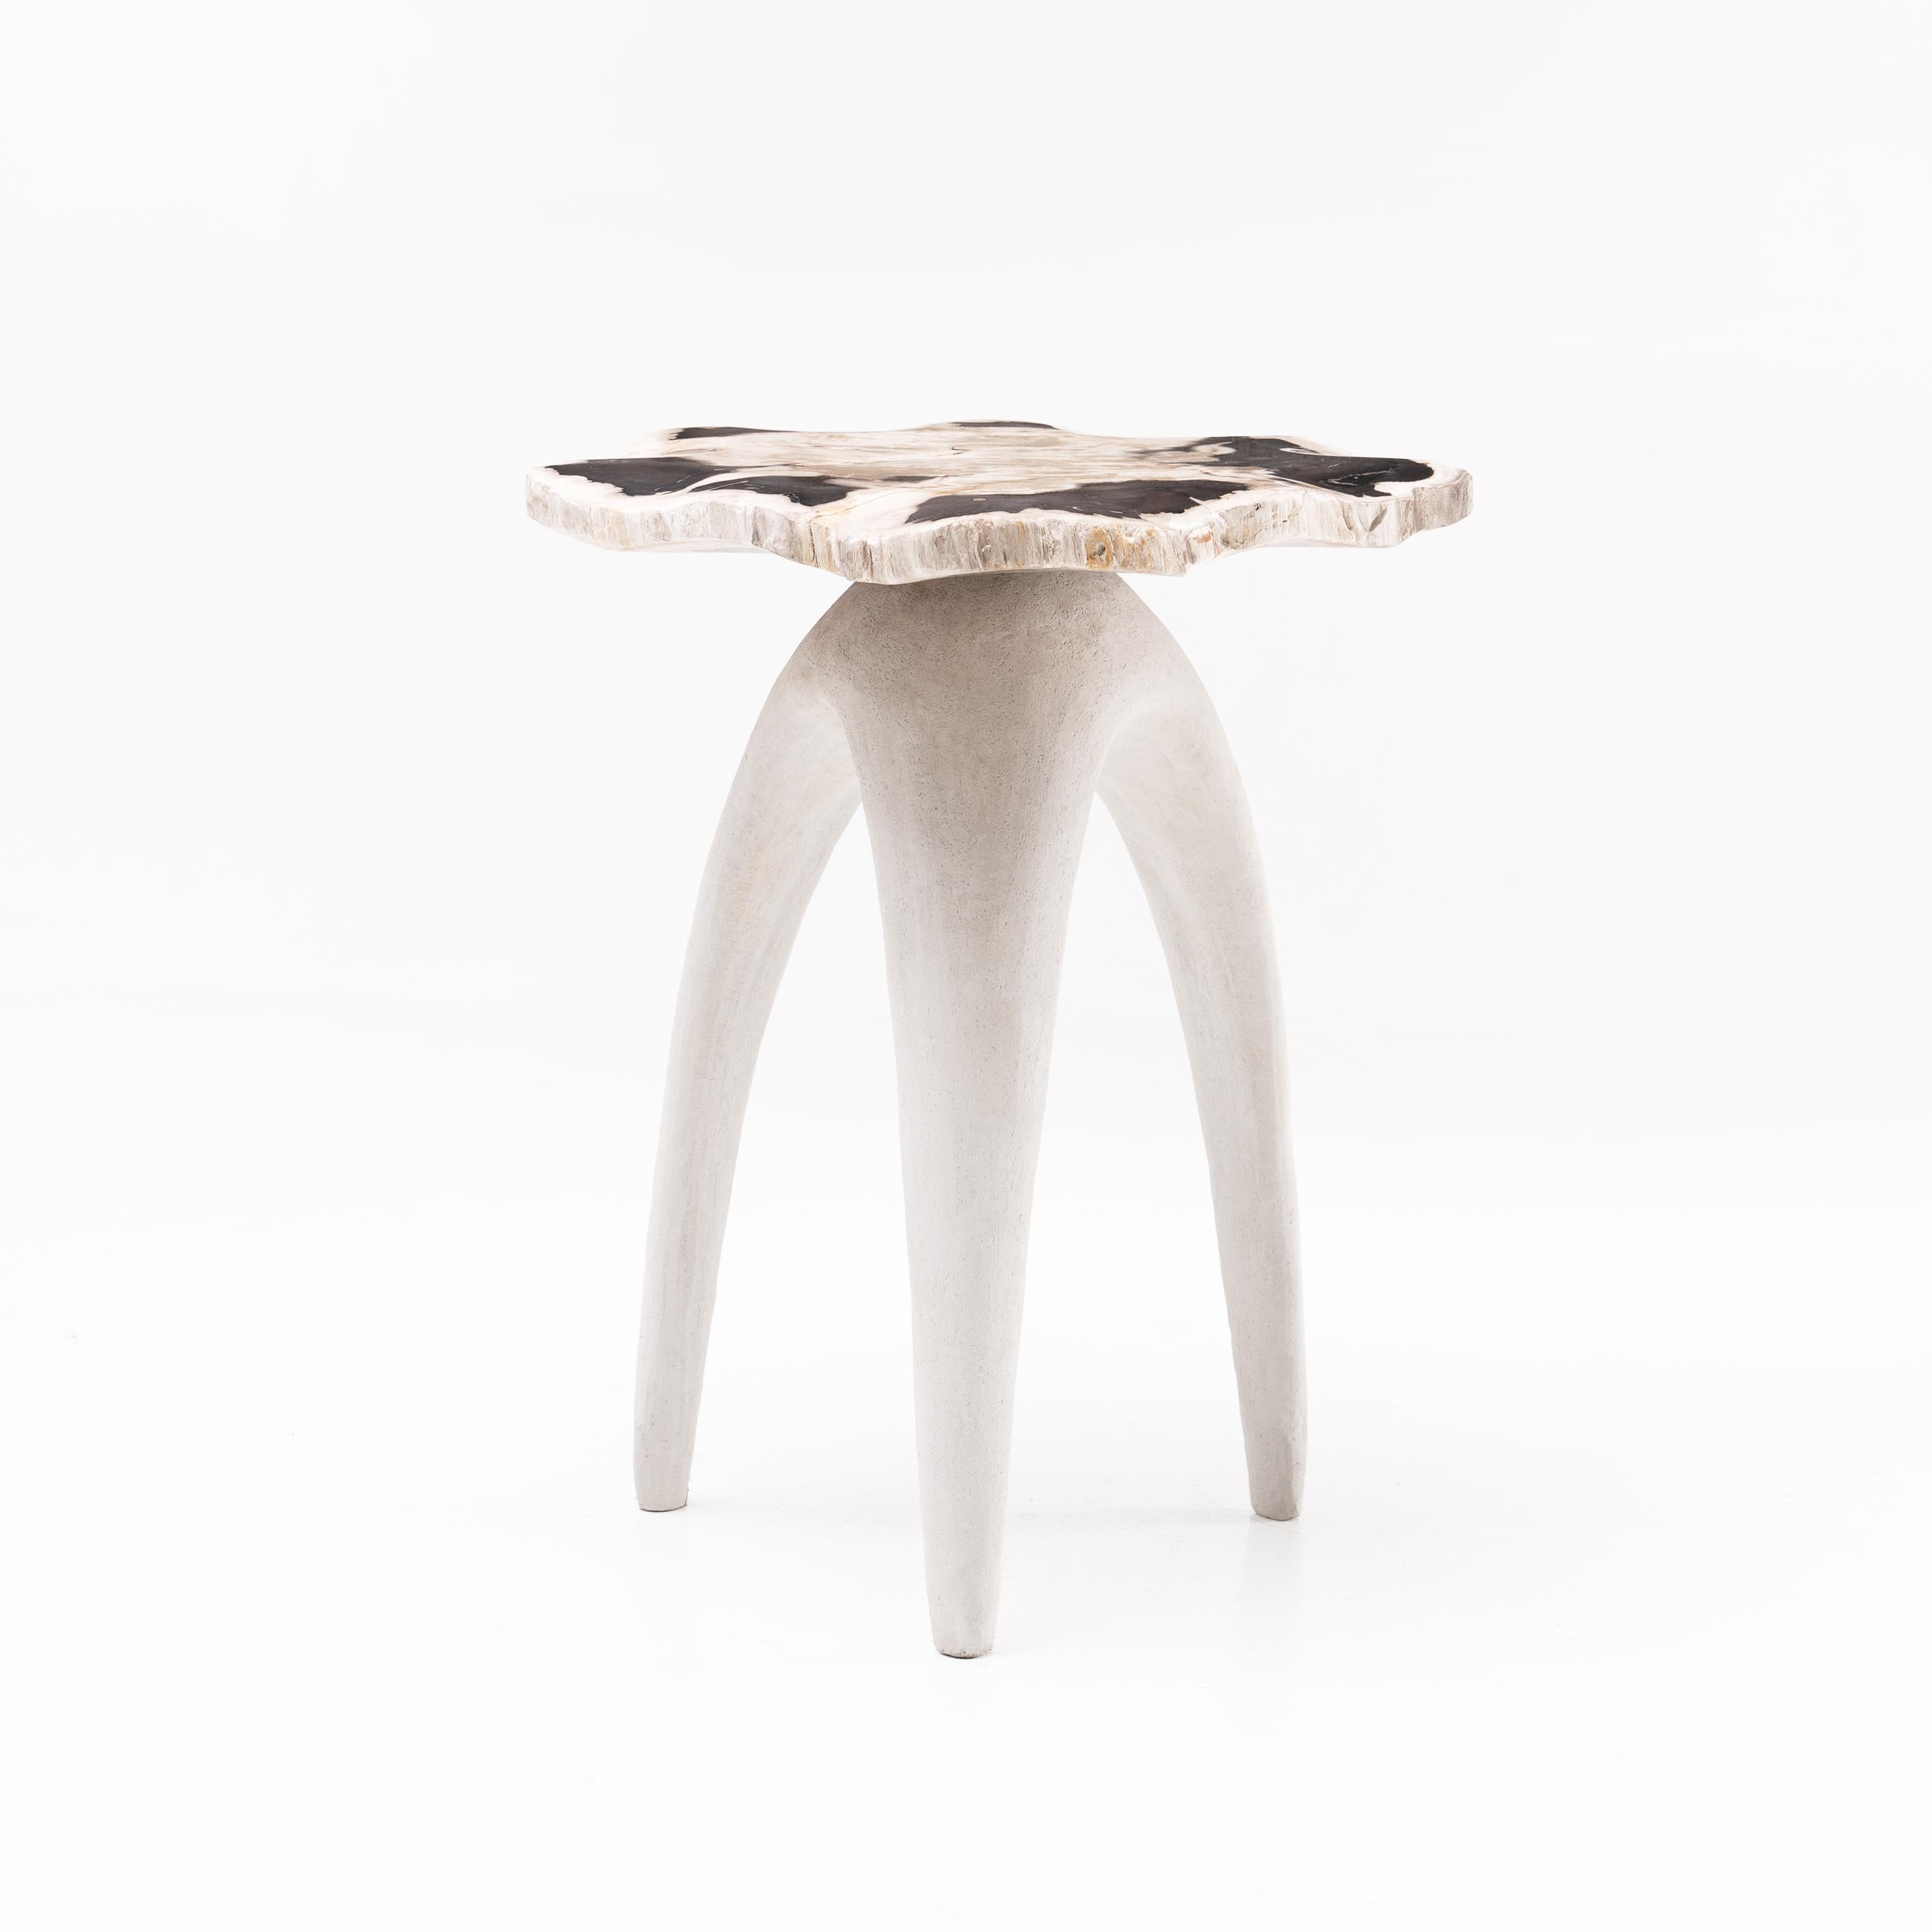 The ‘Bermuda Love Triangle’ sculptural side-table features a solid, hand carved petrified wood top, perched upon an organic shaped tripod base made from limestone composite.

Petrified wood is created from fossilised trees transformed into stone by